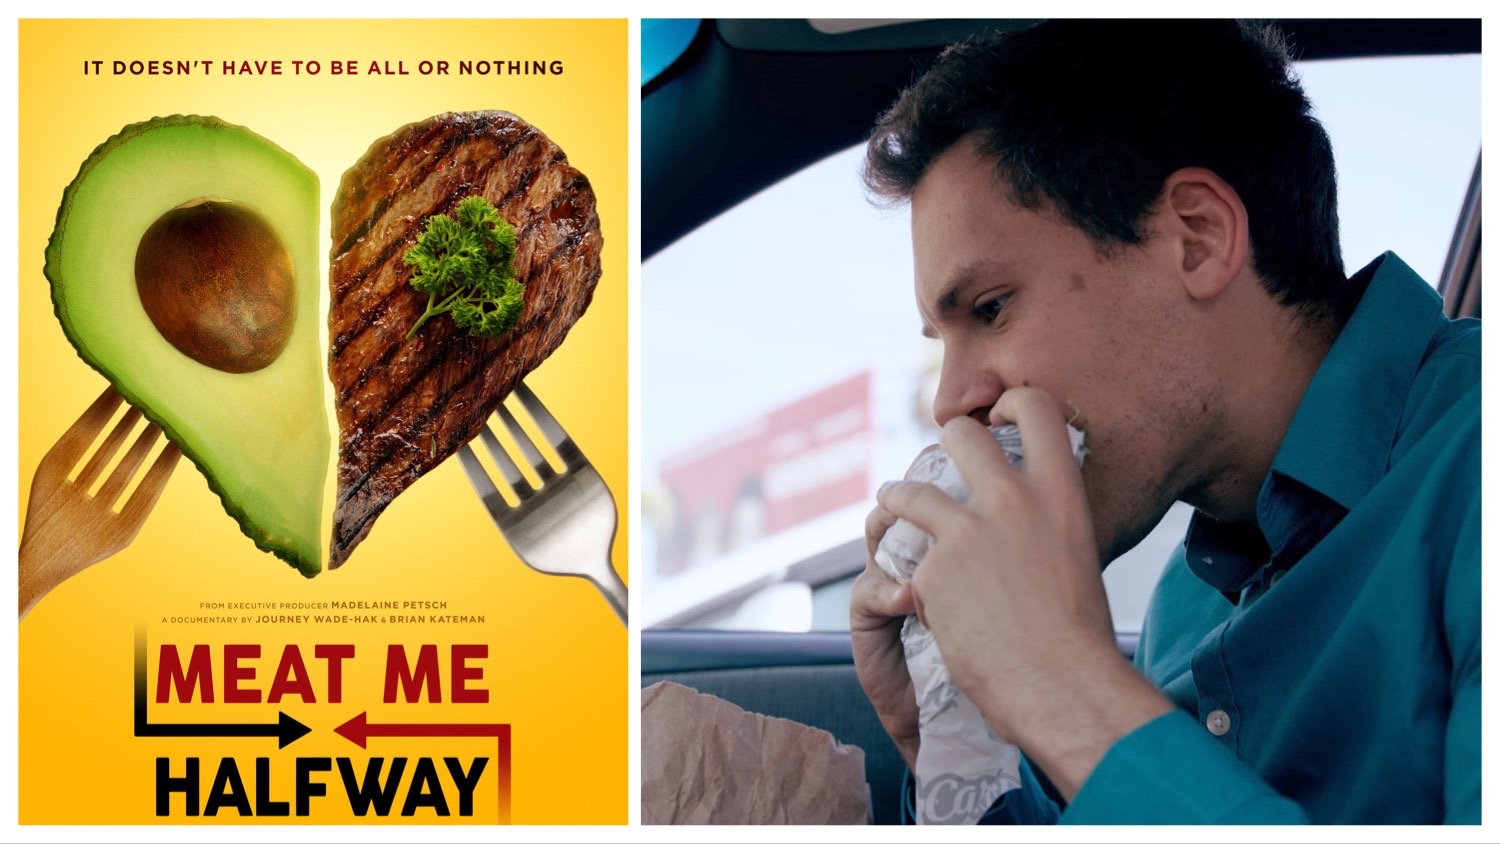 A split photo of the 'Meat Me Halfway' poster and Brian Kateman eating a meat-free meal